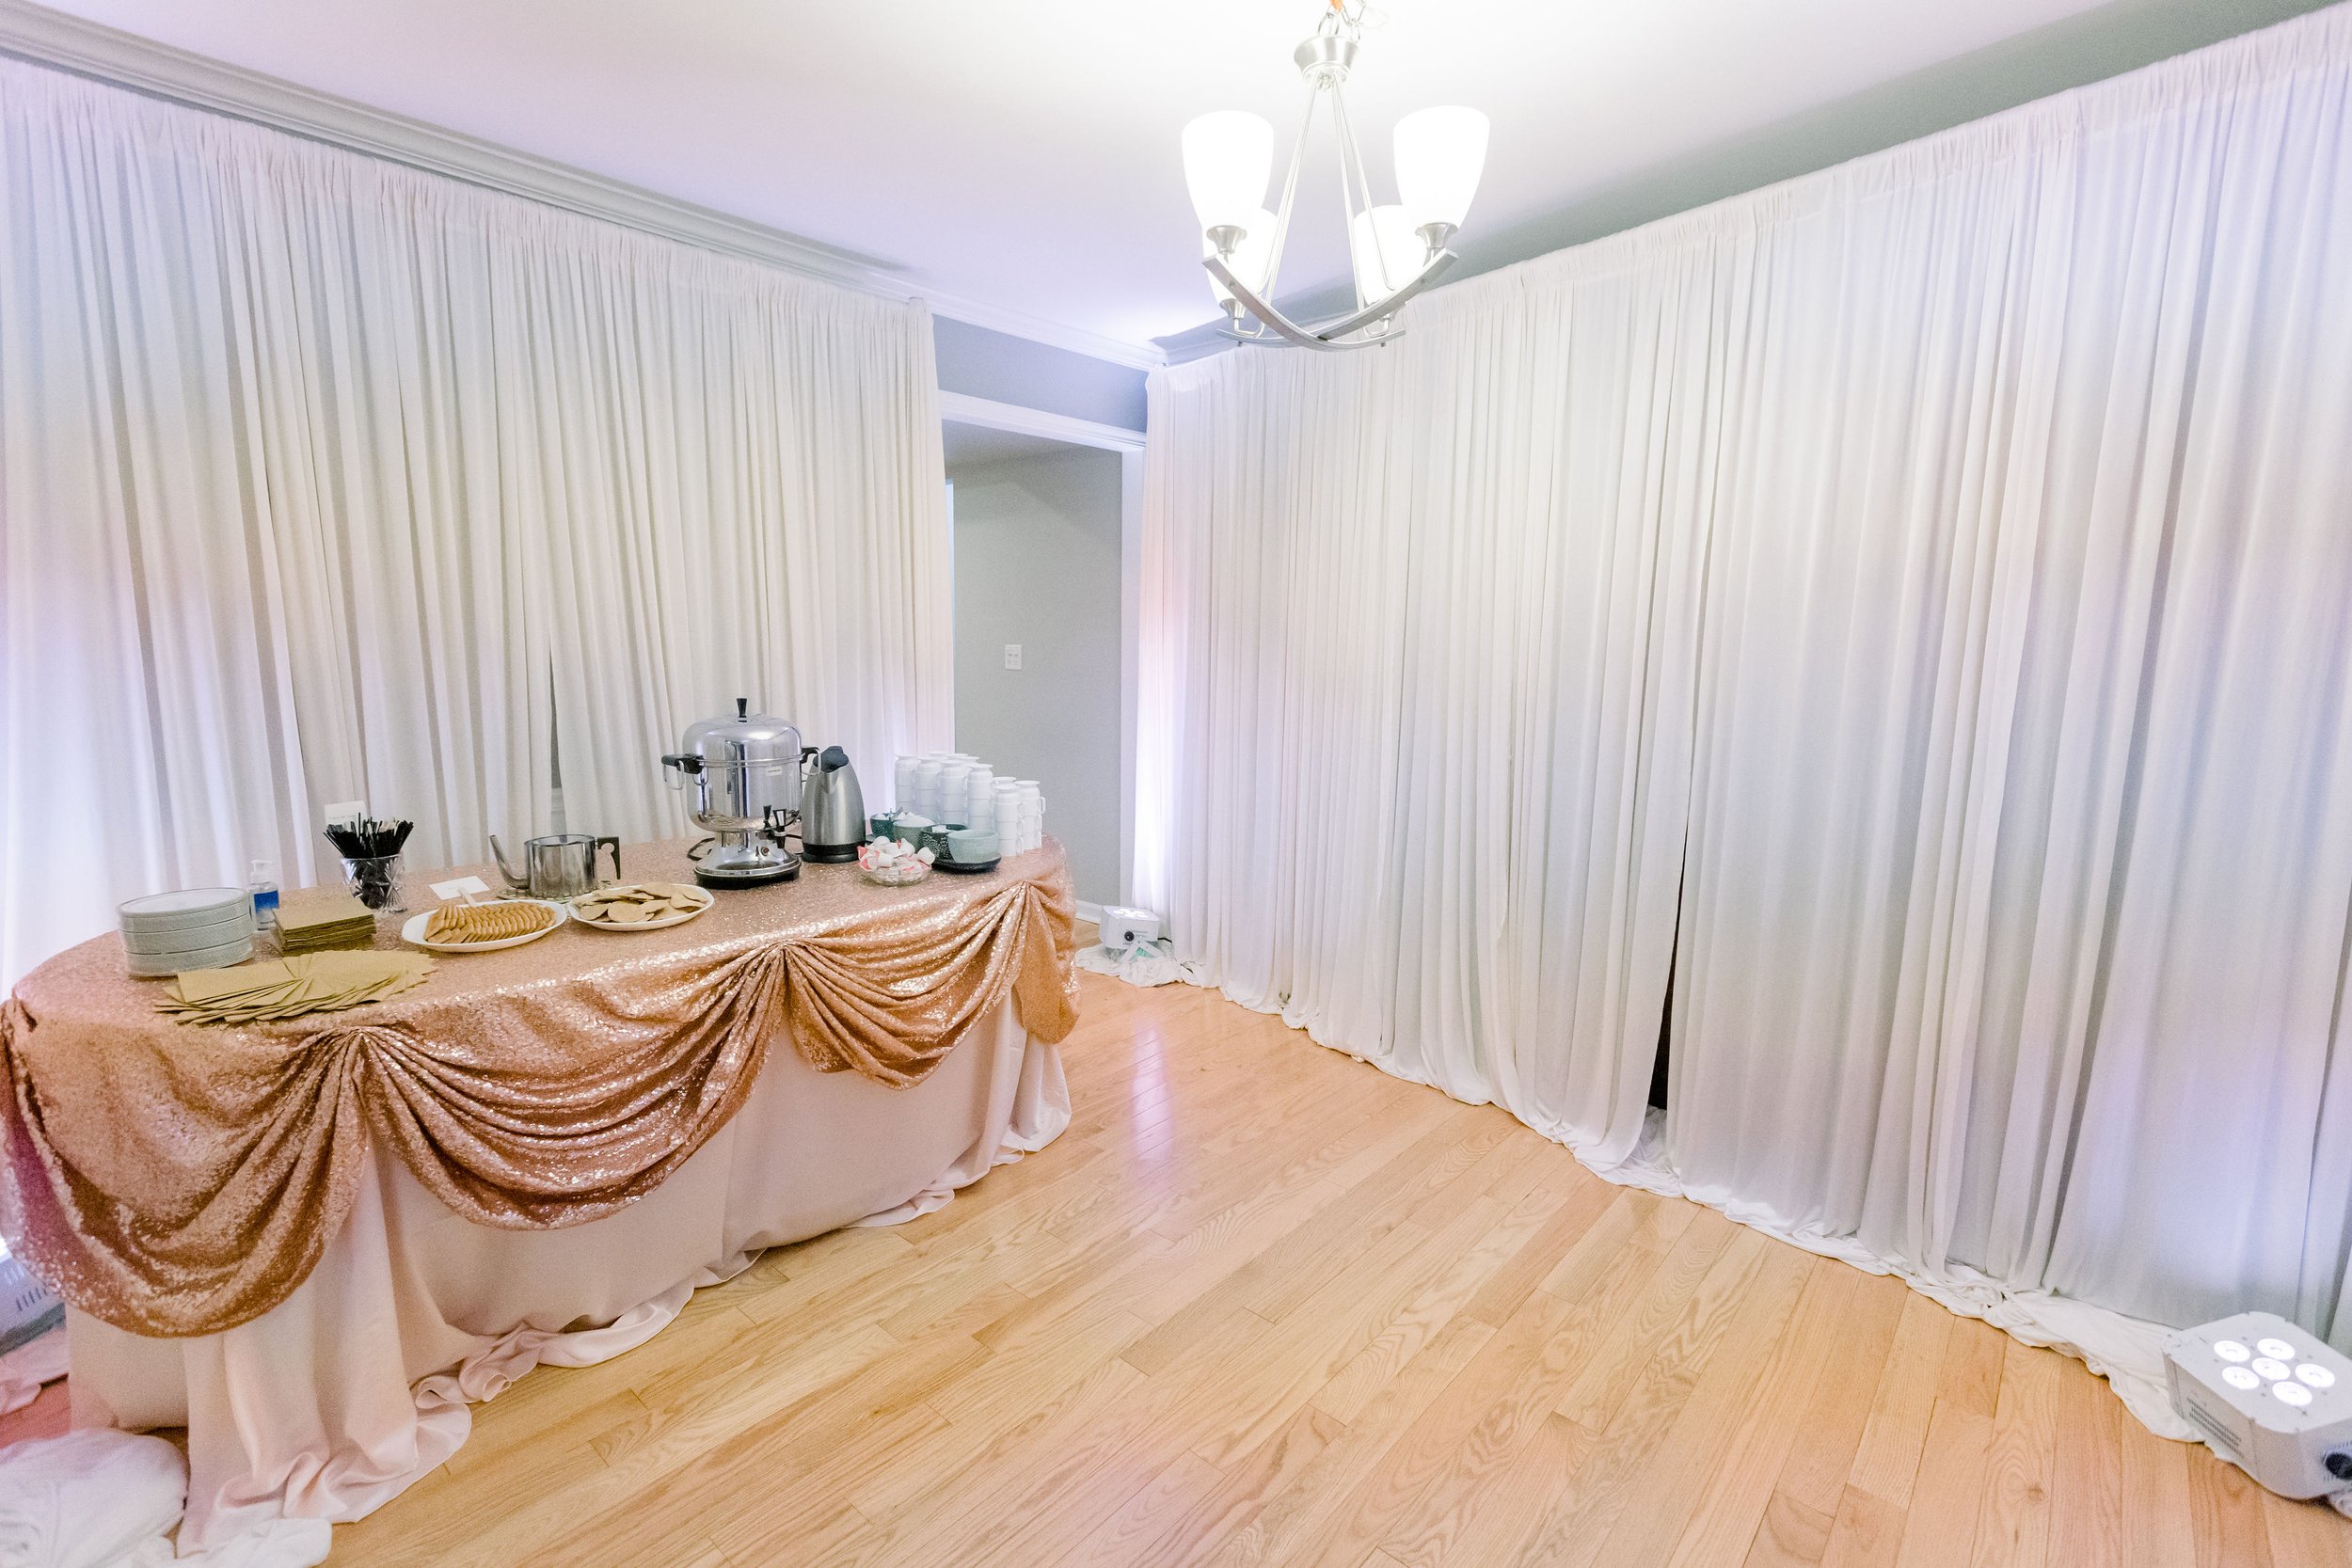 Basement wall draping wedding in the living room garage wall draping intimate wedding at home micro wedding event in chicago chiavari chairs table ren (9).jpg